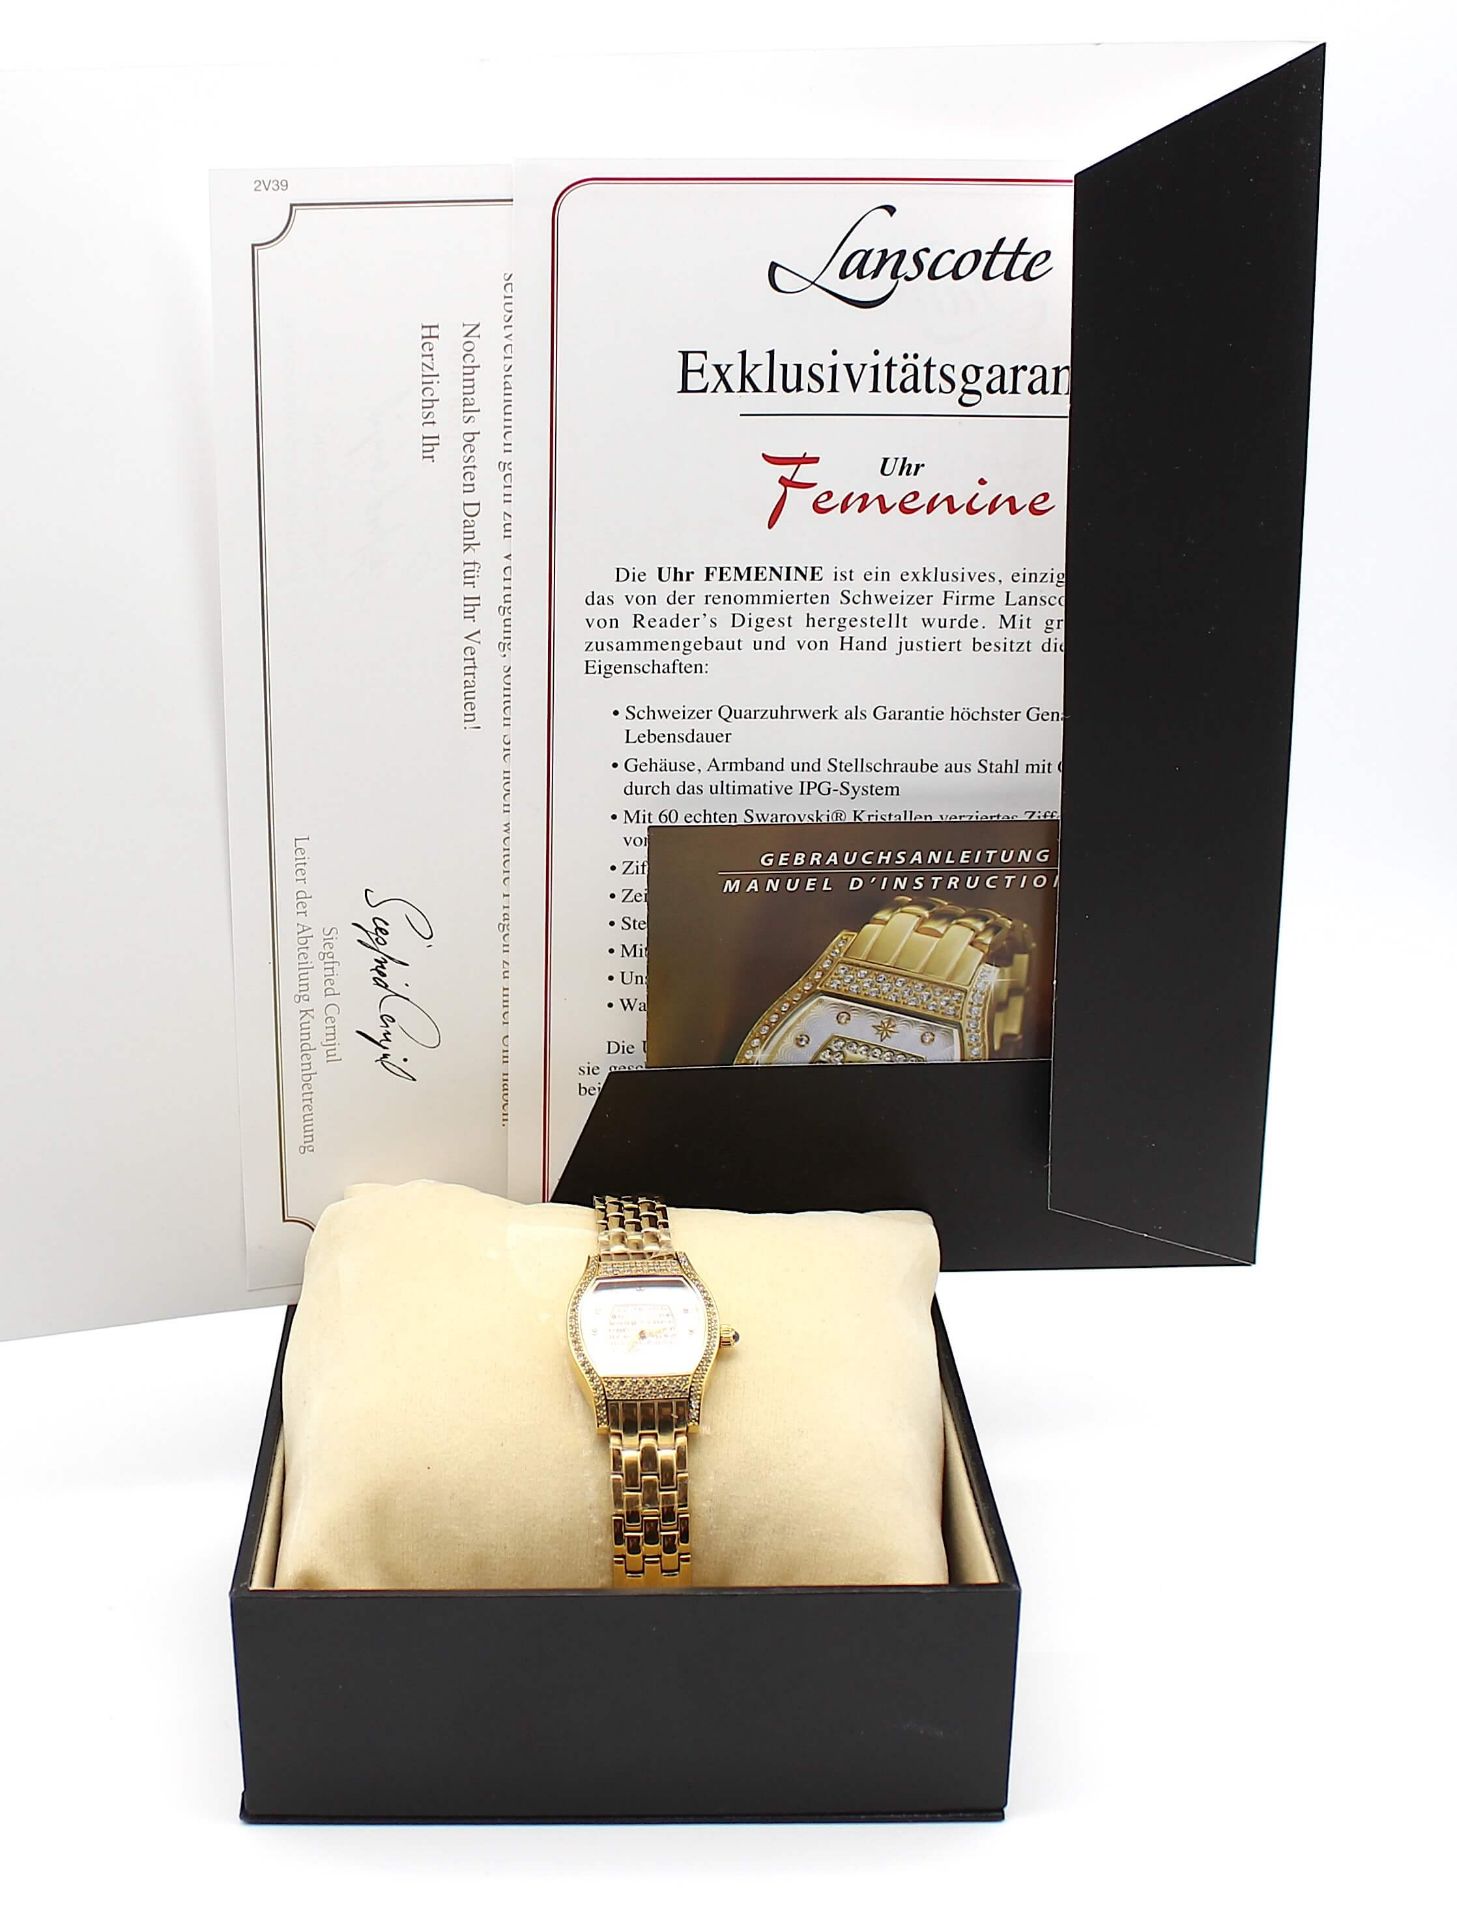 Ladies wrist Watch Lanscotte gold plated with Swarovski Crystals - Image 4 of 4